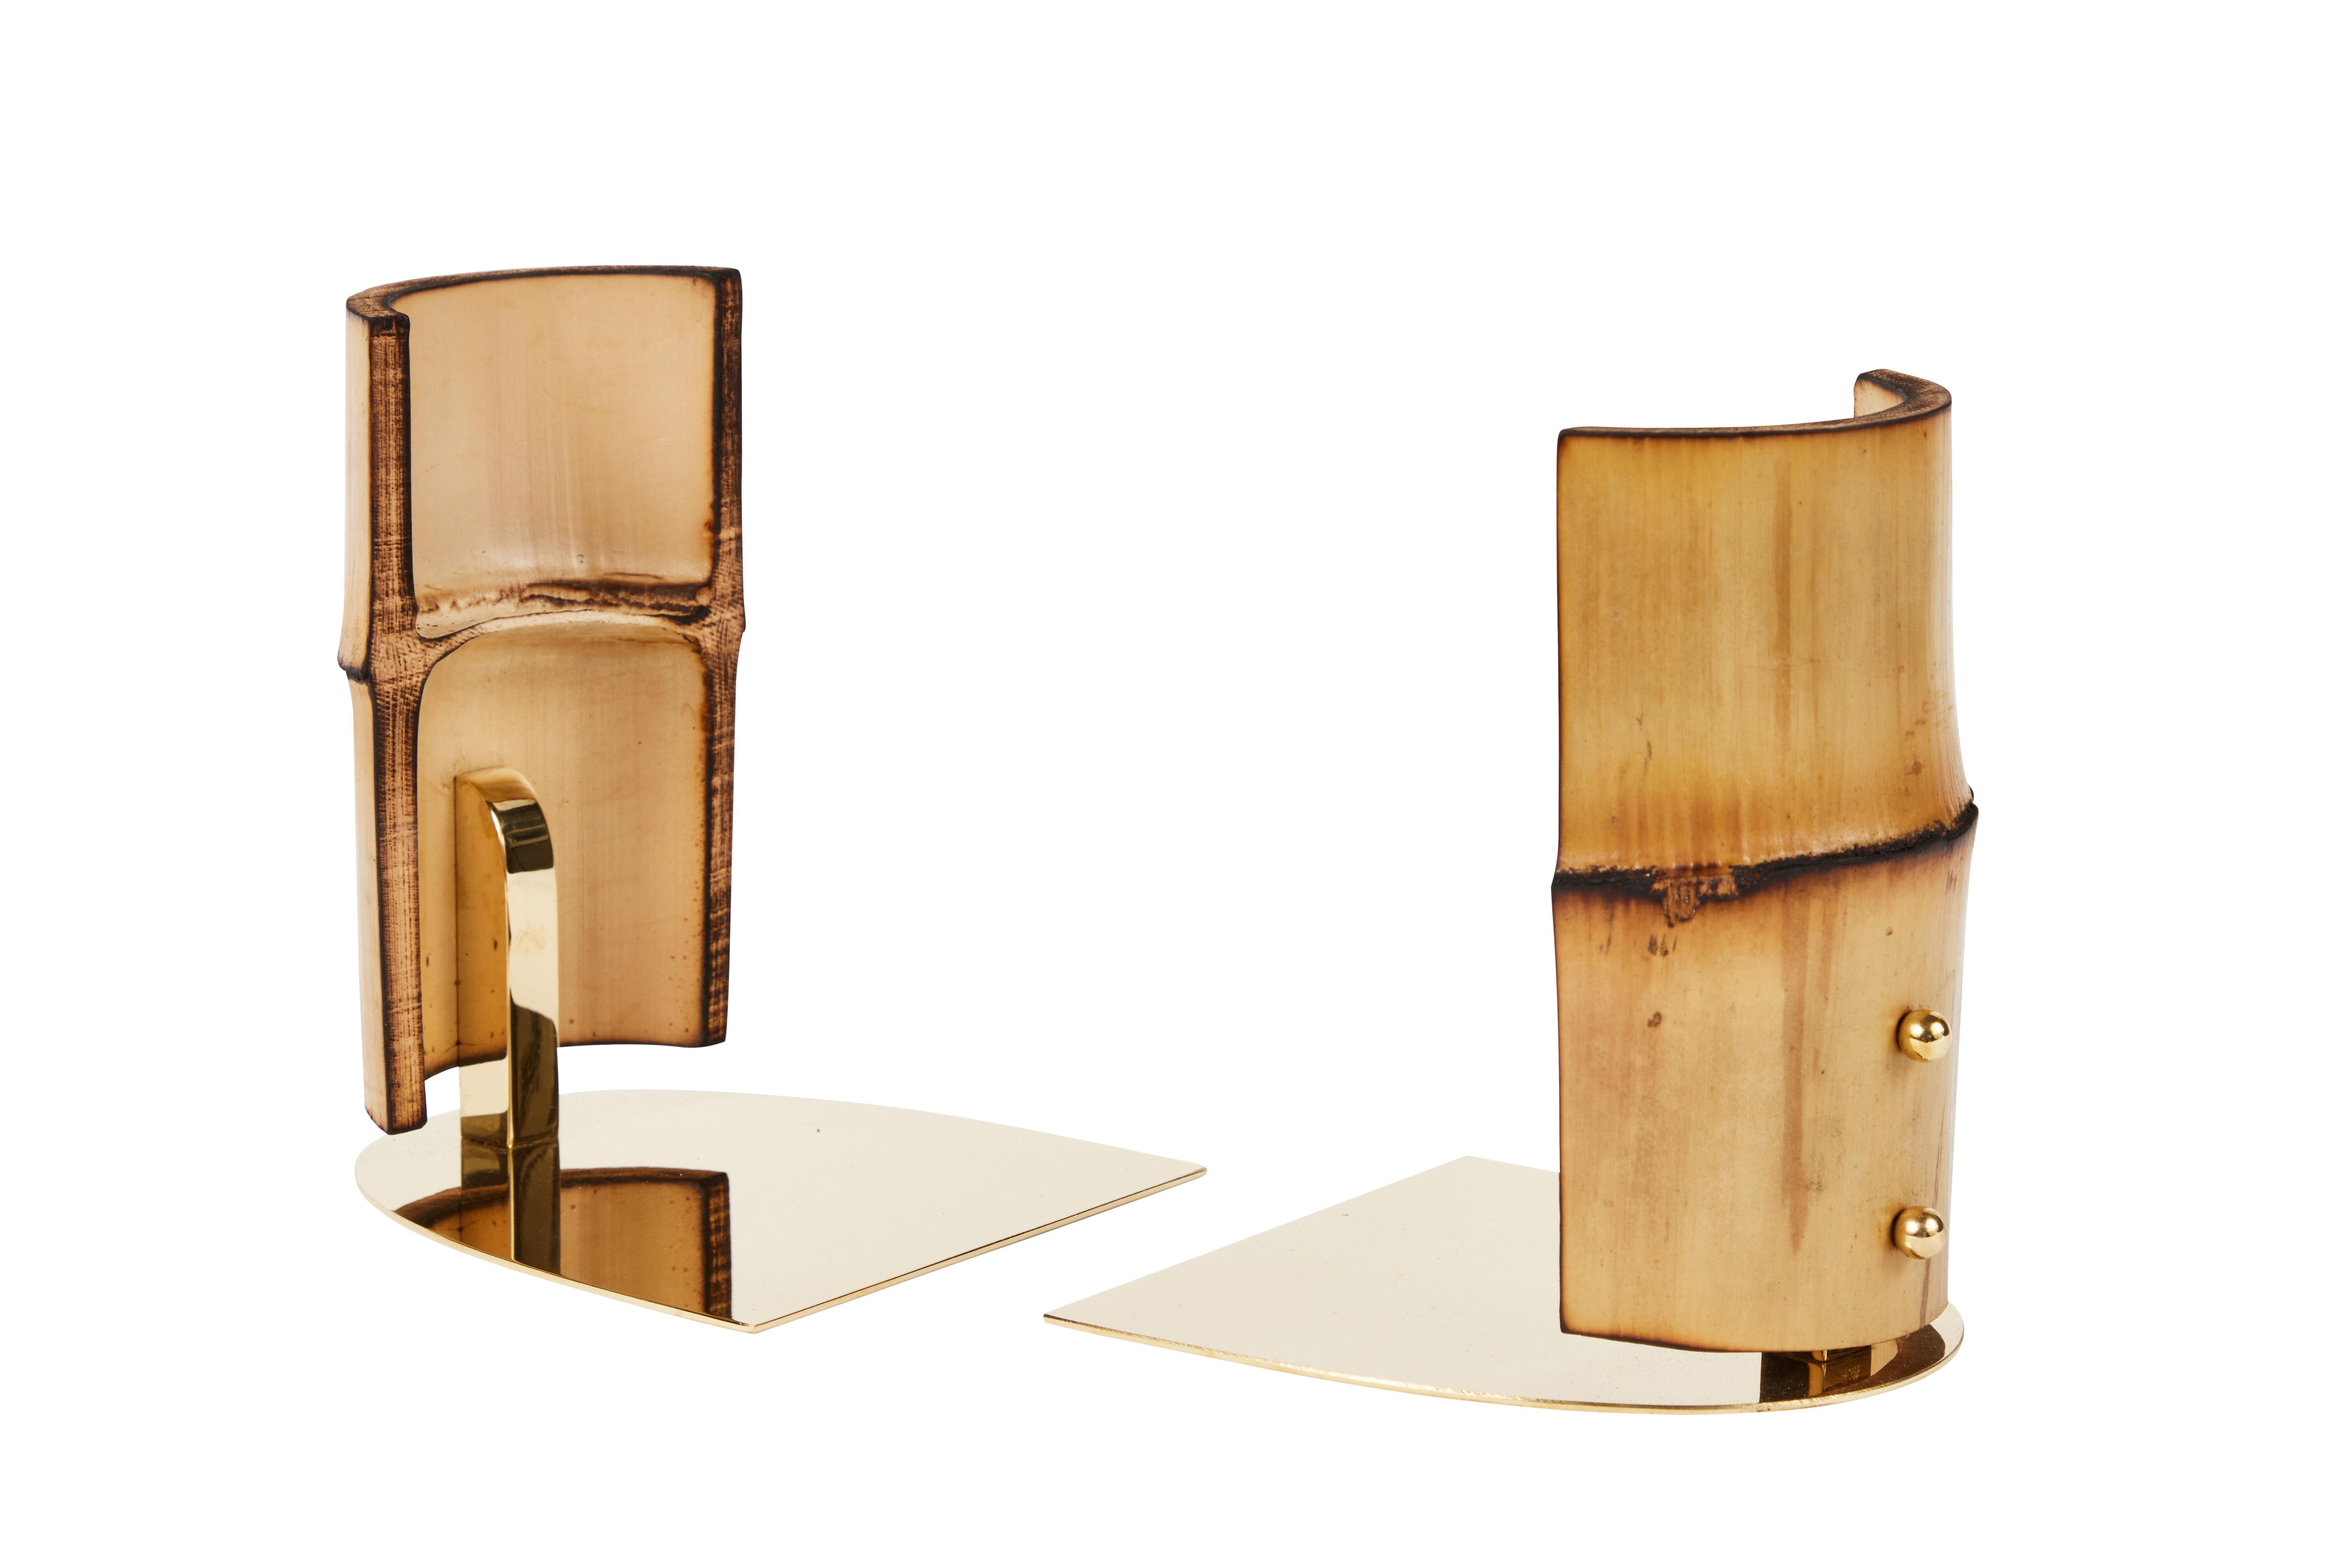 Pair of Carl Auböck Model #1937 'Bamboo' bookends. Designed in the 1950s, this incredibly refined and sculptural pair of bookends are executed hand cut and polished bamboo and brass. 

Price is for the pair. Two in stock ready to ship. Available in